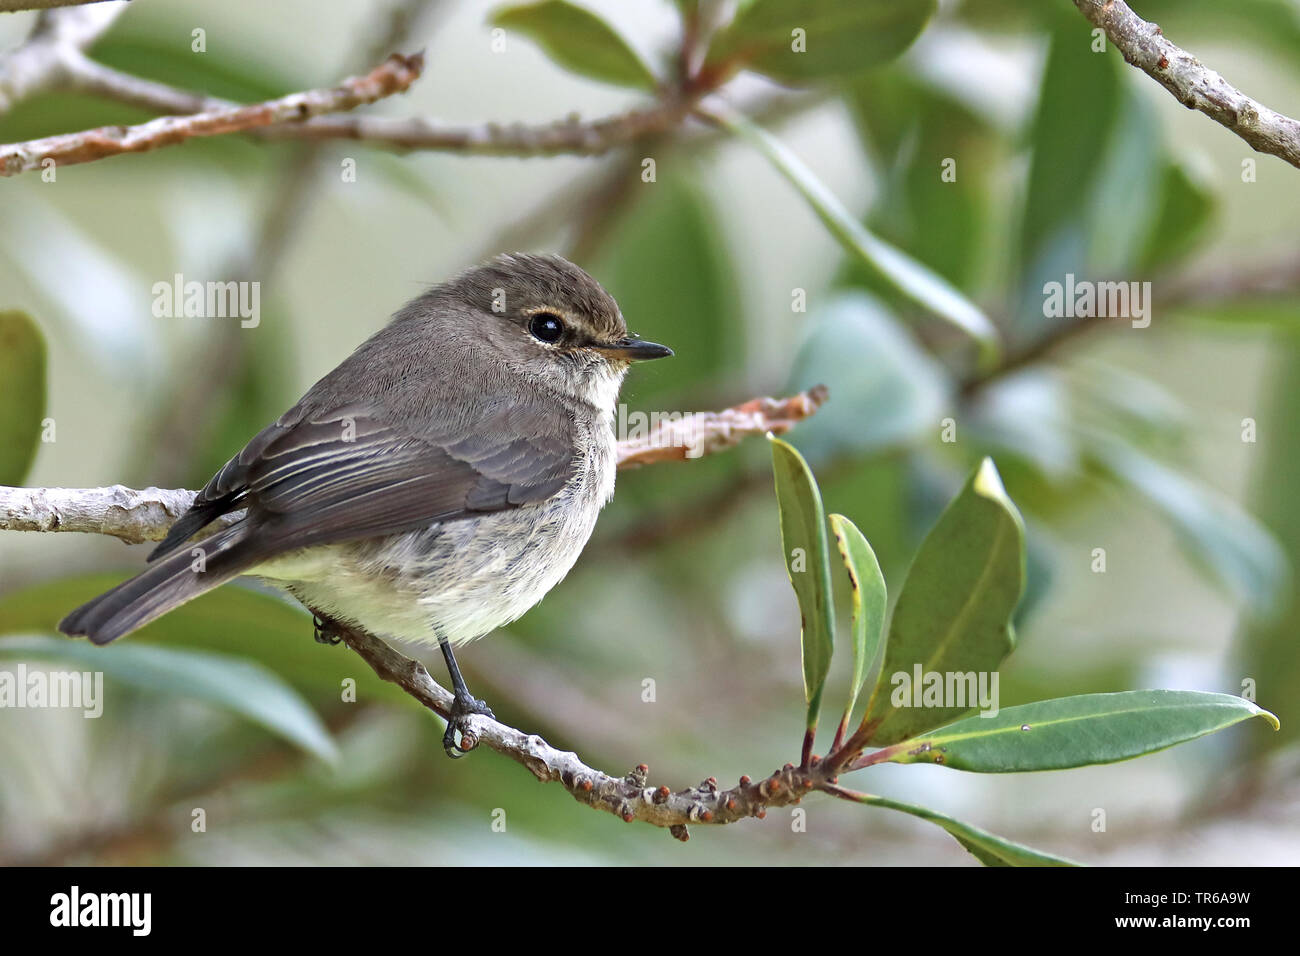 African Dusky Flycatcher, Dusky Flycatcher, Dusky Alseonax (Muscicapa adusta), sitting on a branch, South Africa, Western Cape, Wilderness National Park Stock Photo